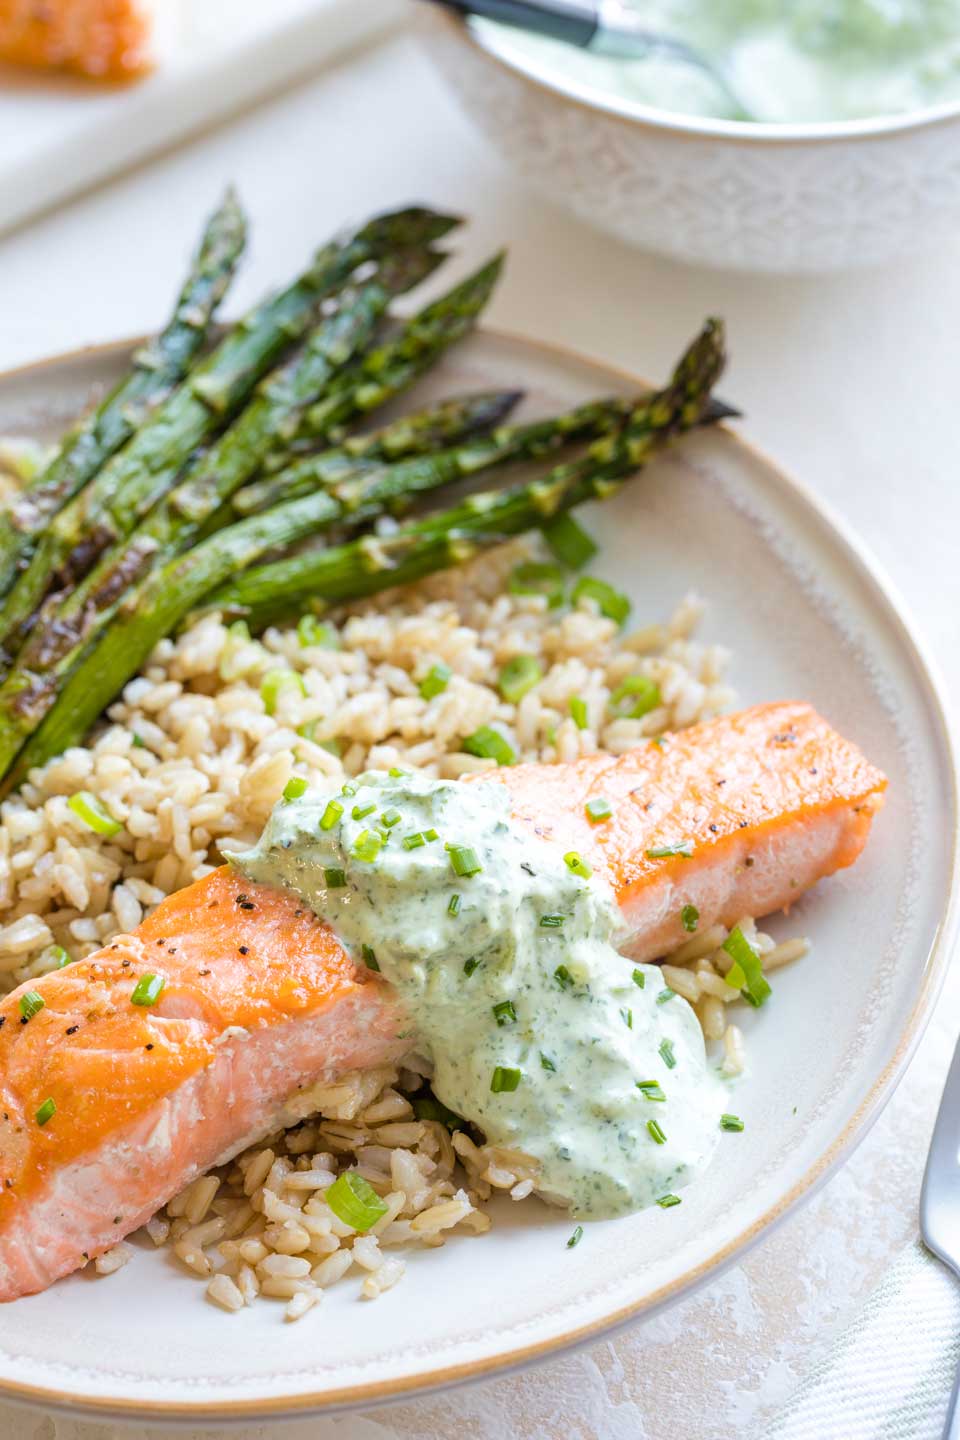 Closeup of the finished recipe, with the pan seared salmon arranged on a rimmed dinner plate, served with rice and asparagus, with utensils and additinal sauce just visible at the edges of the photo.